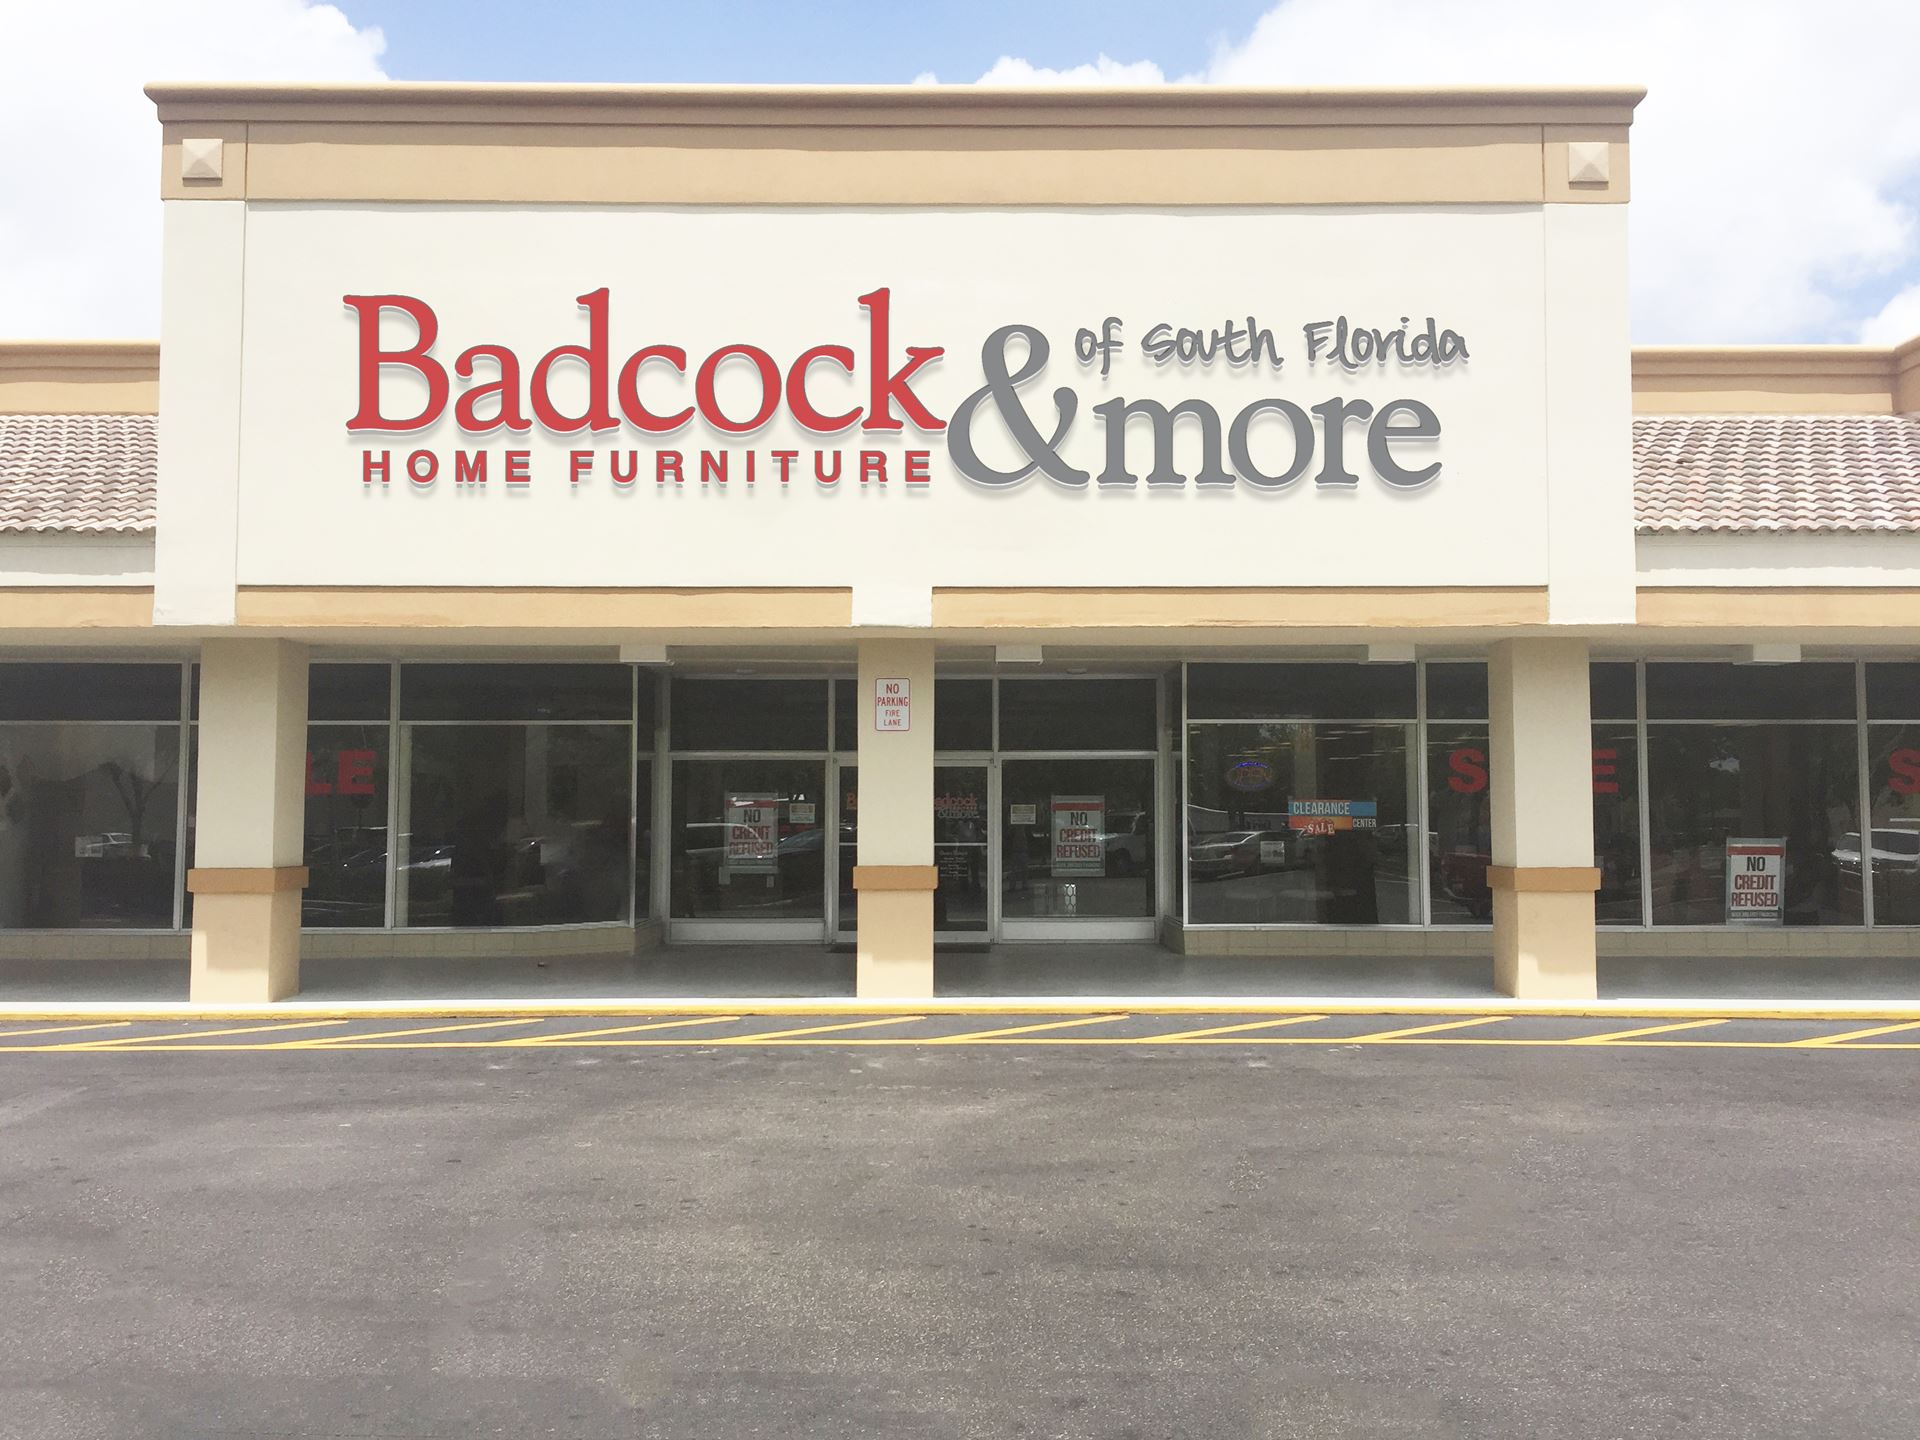 Furniture Stores In Plantation: Furniture, Living Room intended for Badcock And More Furniture